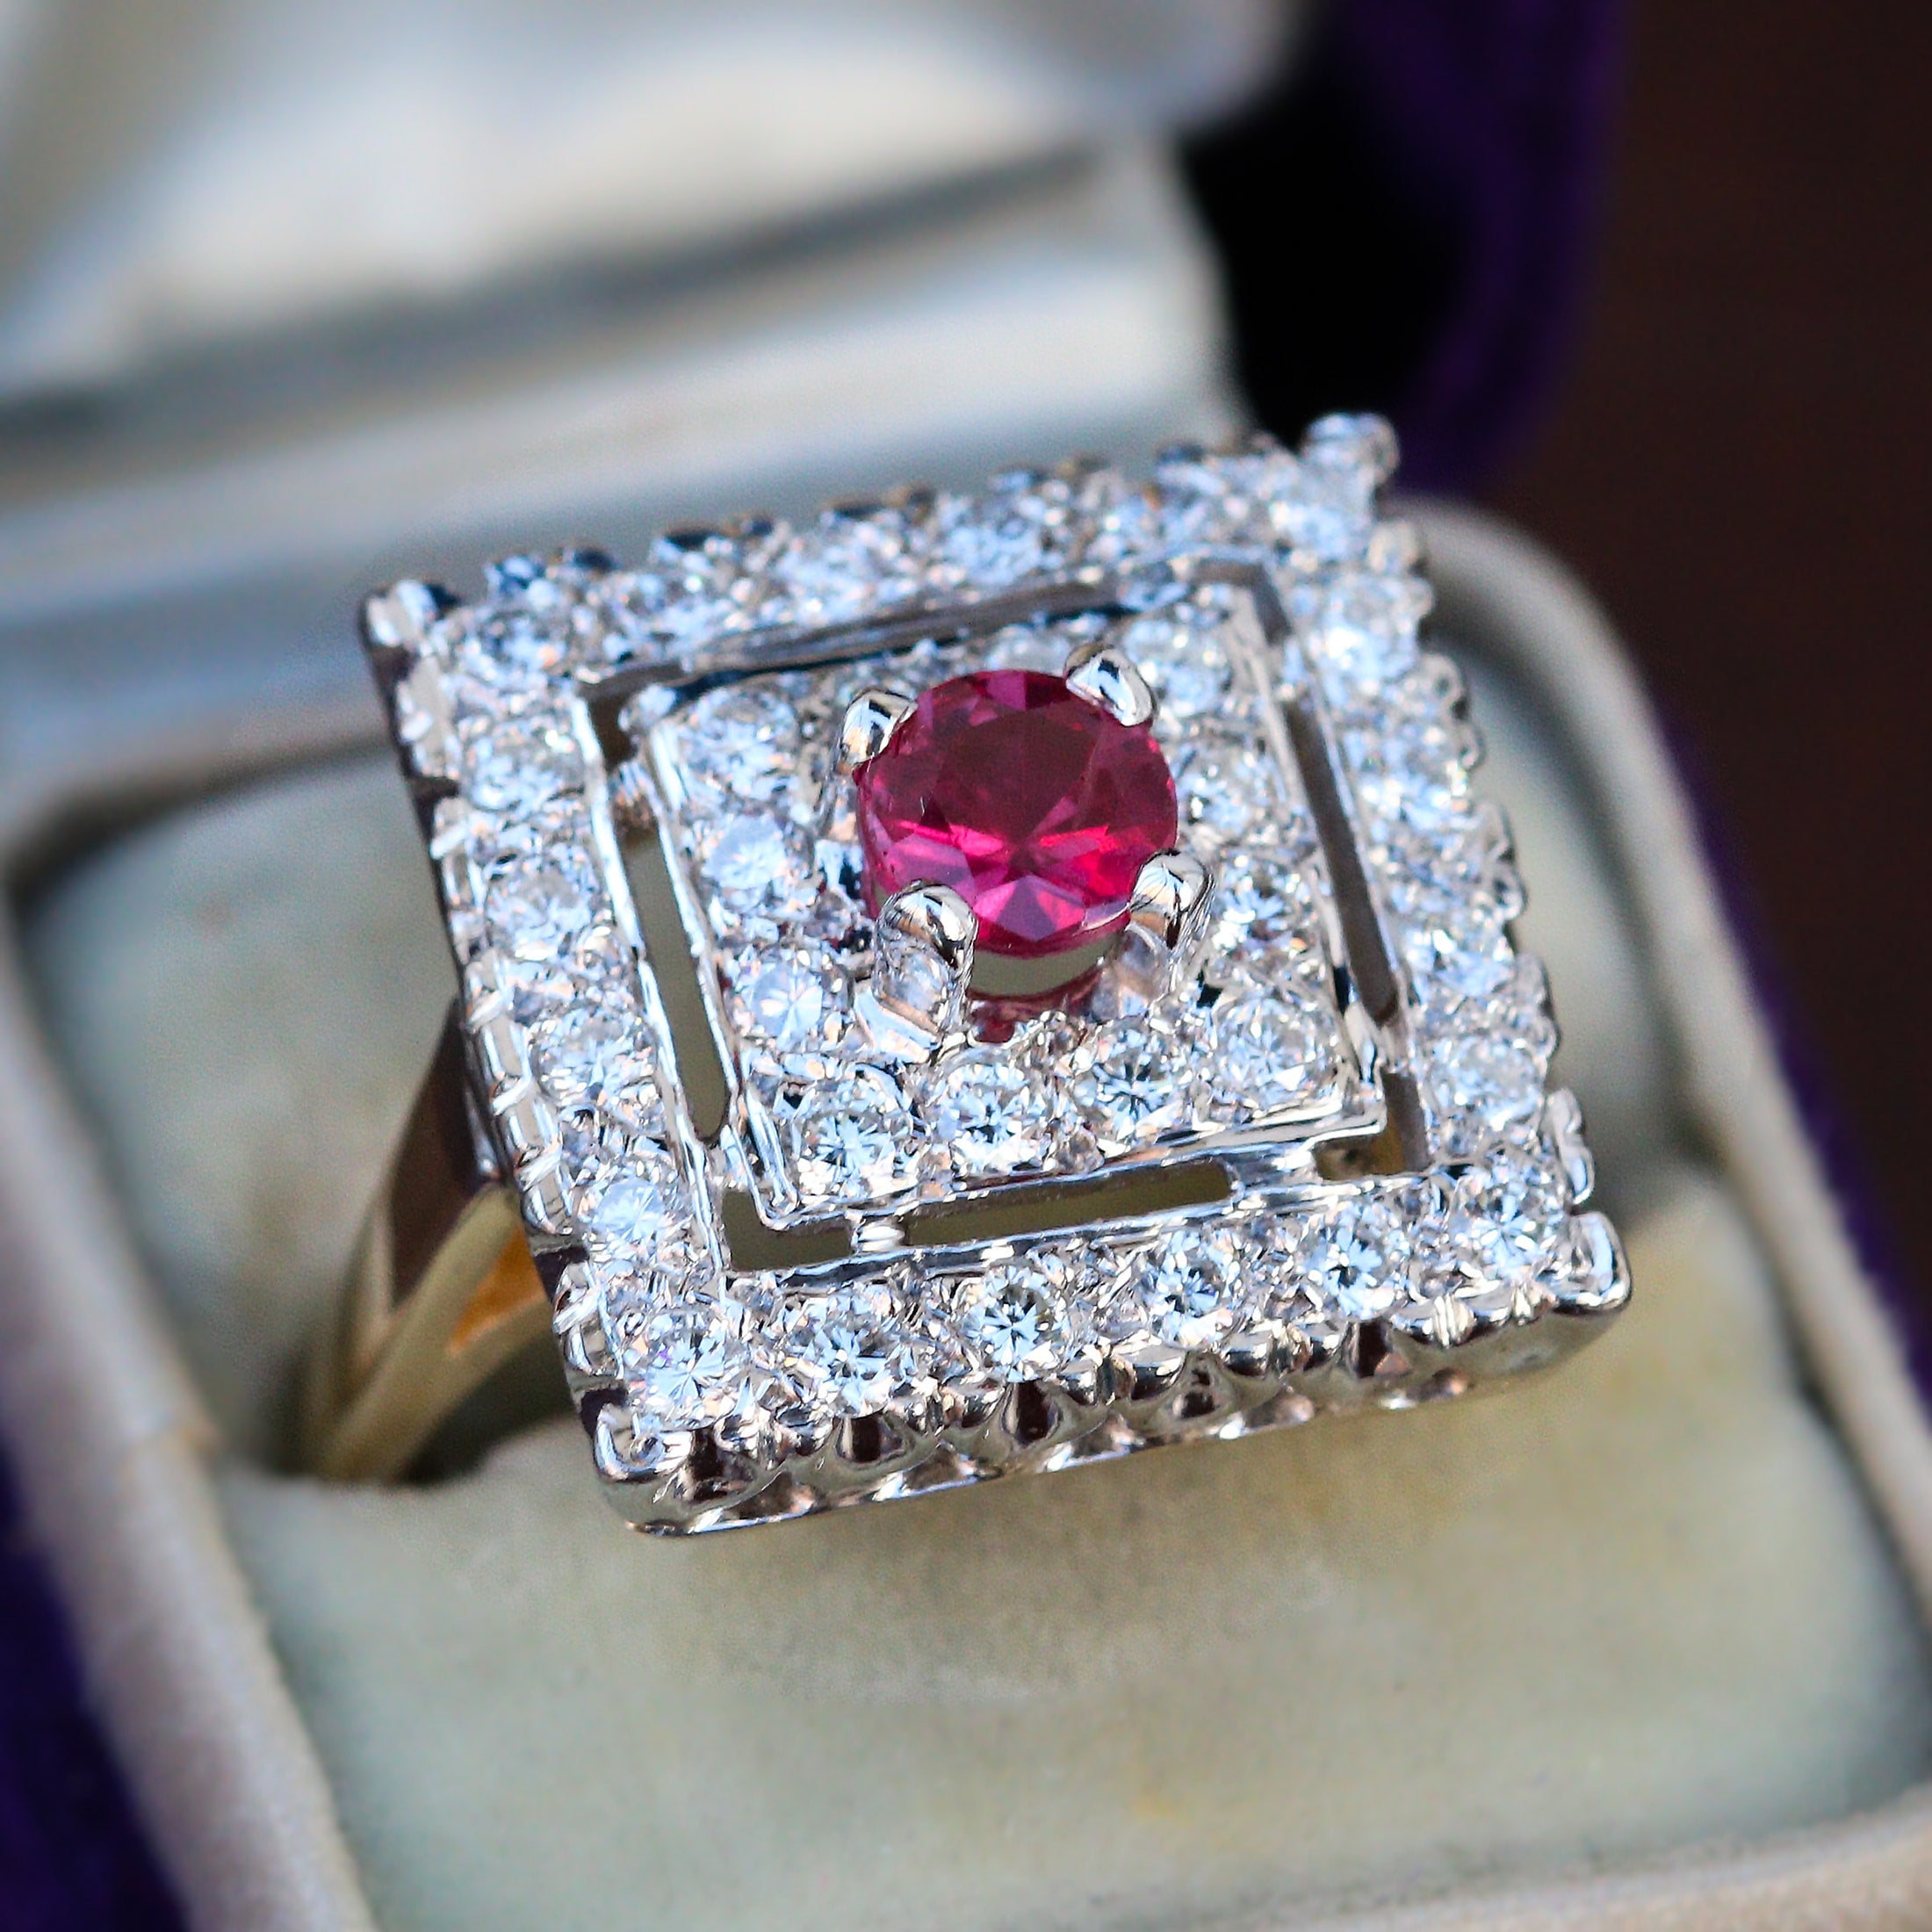 Vintage diamond and ruby ring.